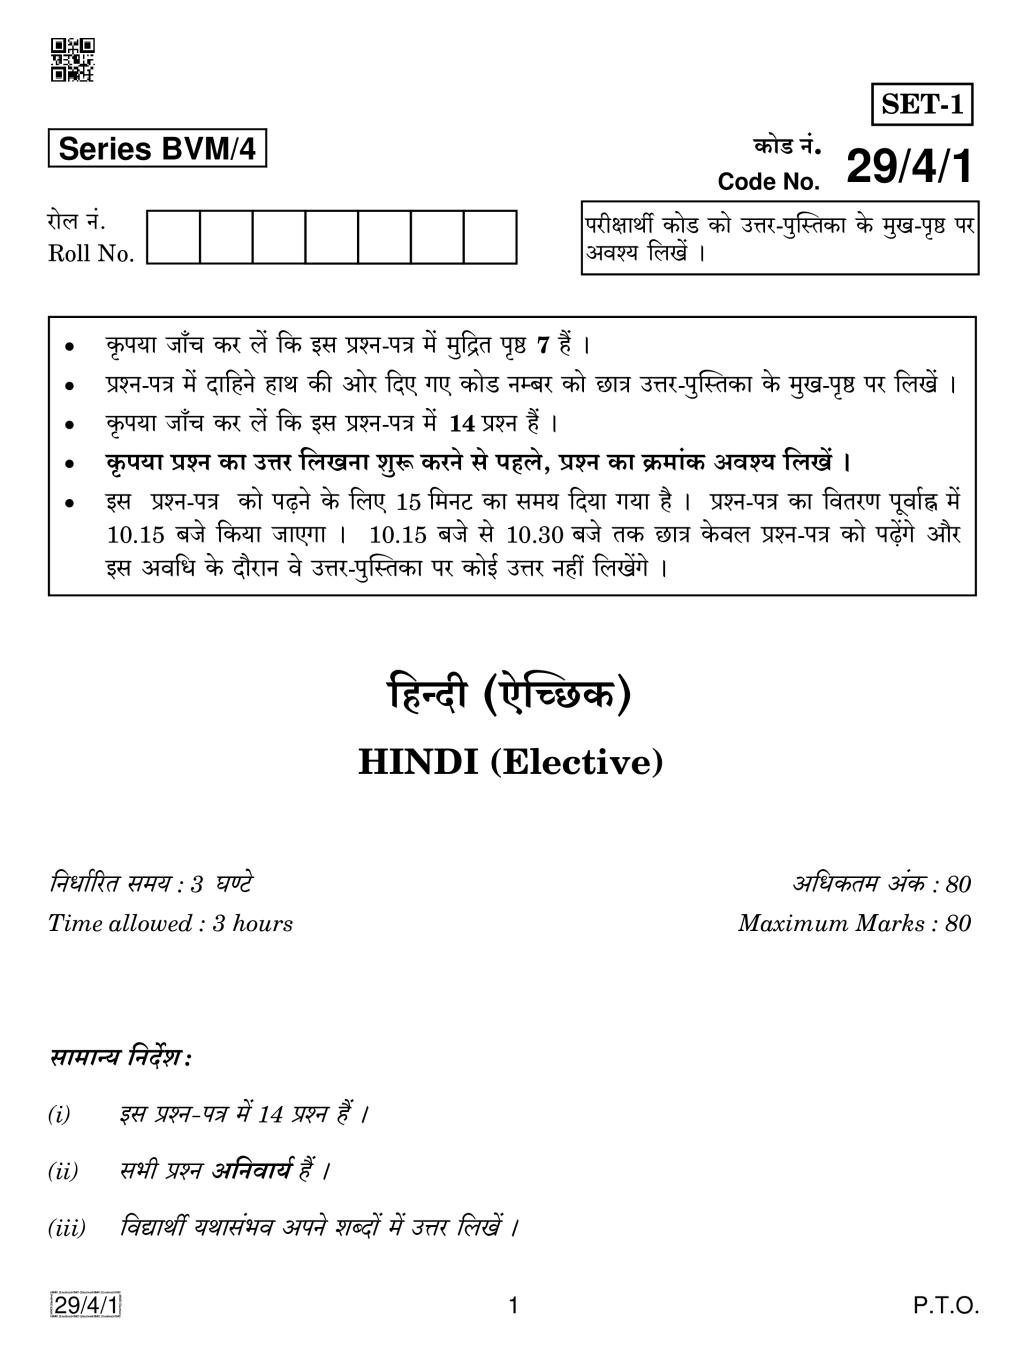 CBSE Class 12 Hindi Elective Question Paper 2019 Set 4 - Page 1